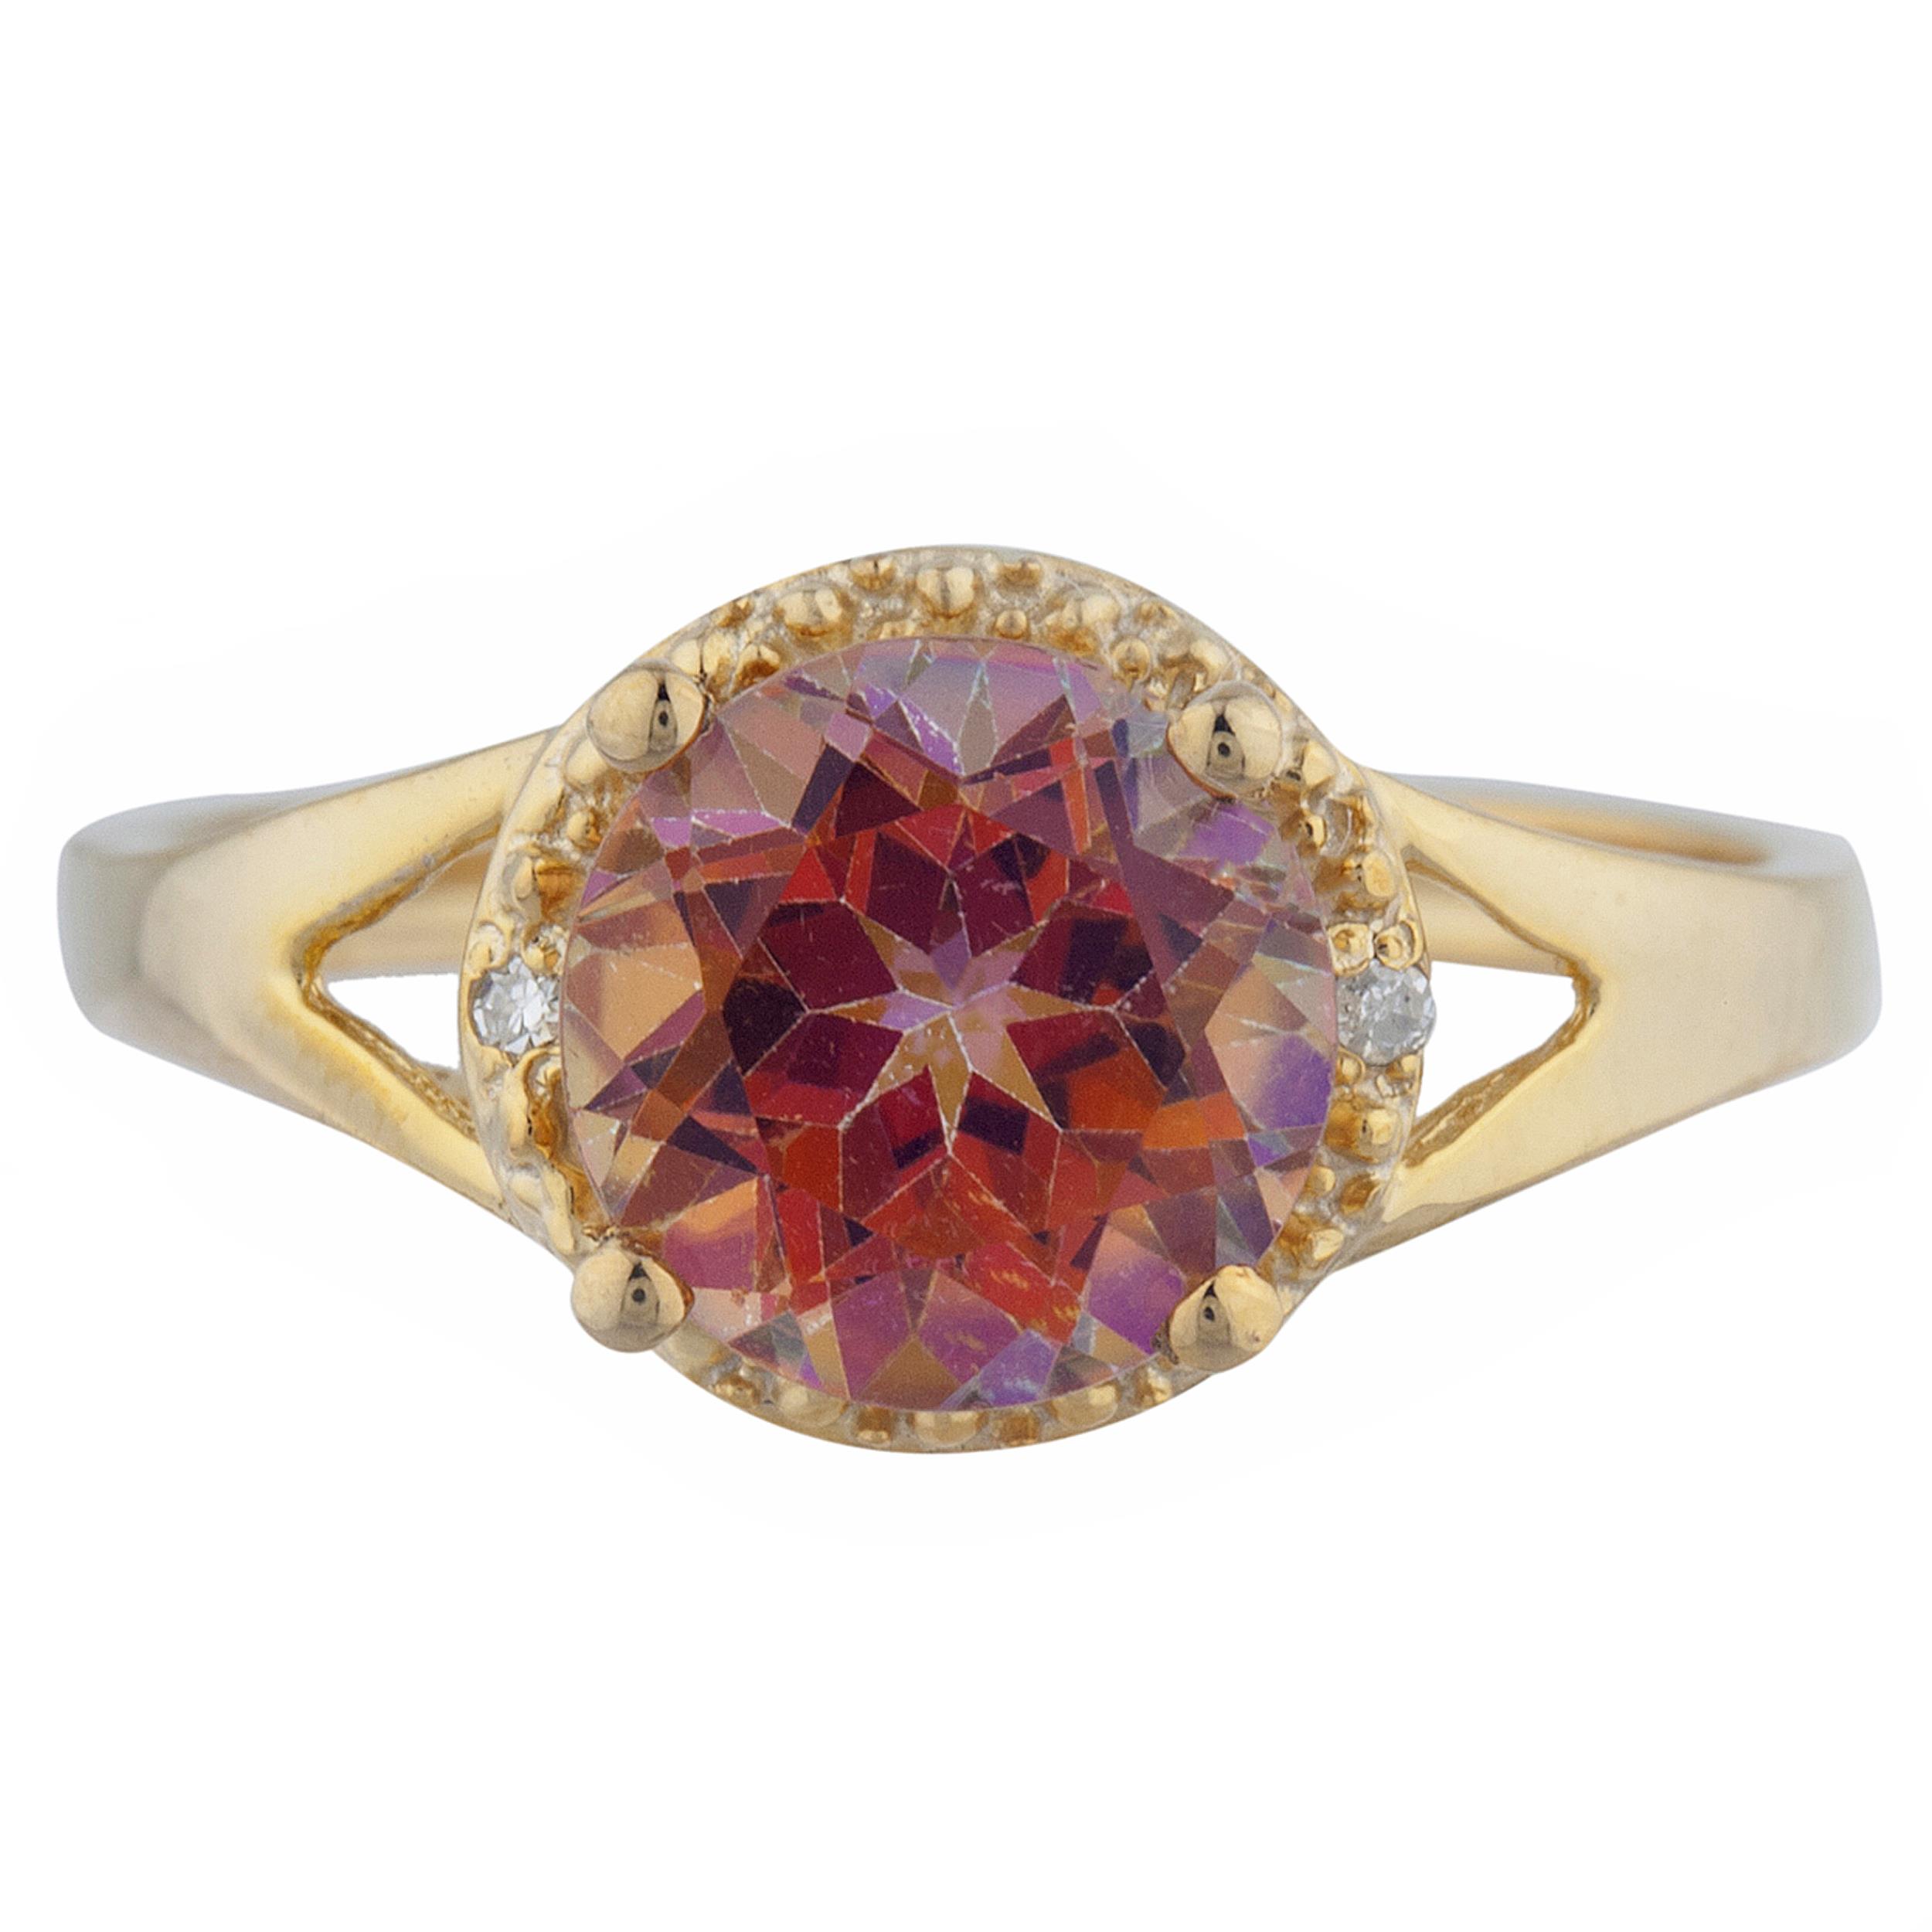 3 Ct Natural Ecstasy Mystic Topaz /& Diamond Oval Design Ring 14Kt Yellow Gold Rose Gold Silver